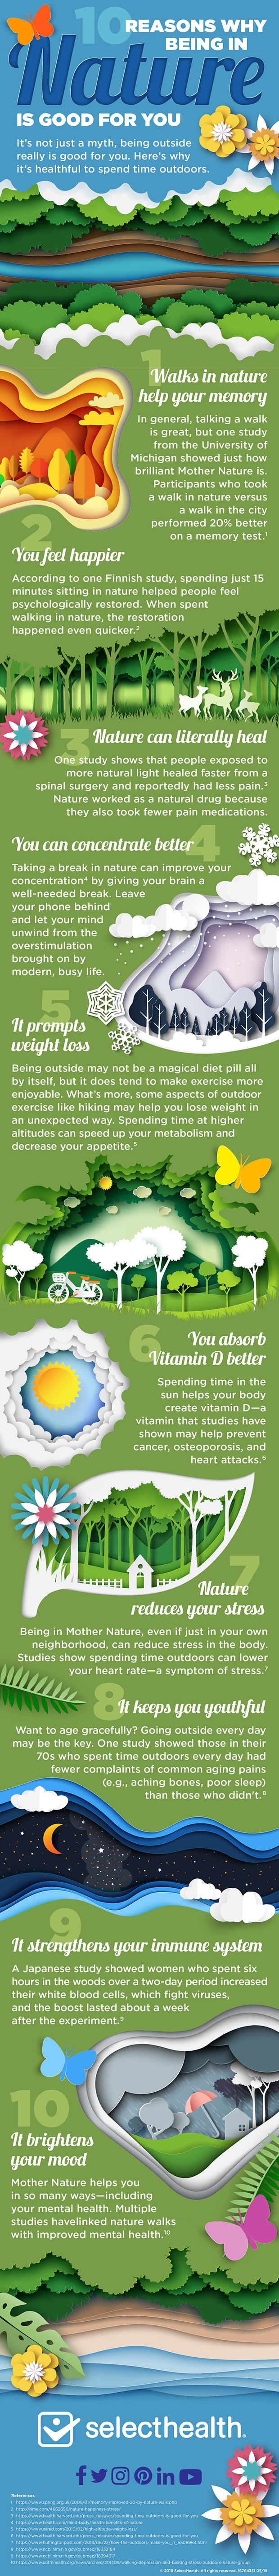 Why nature is good for you, infographic